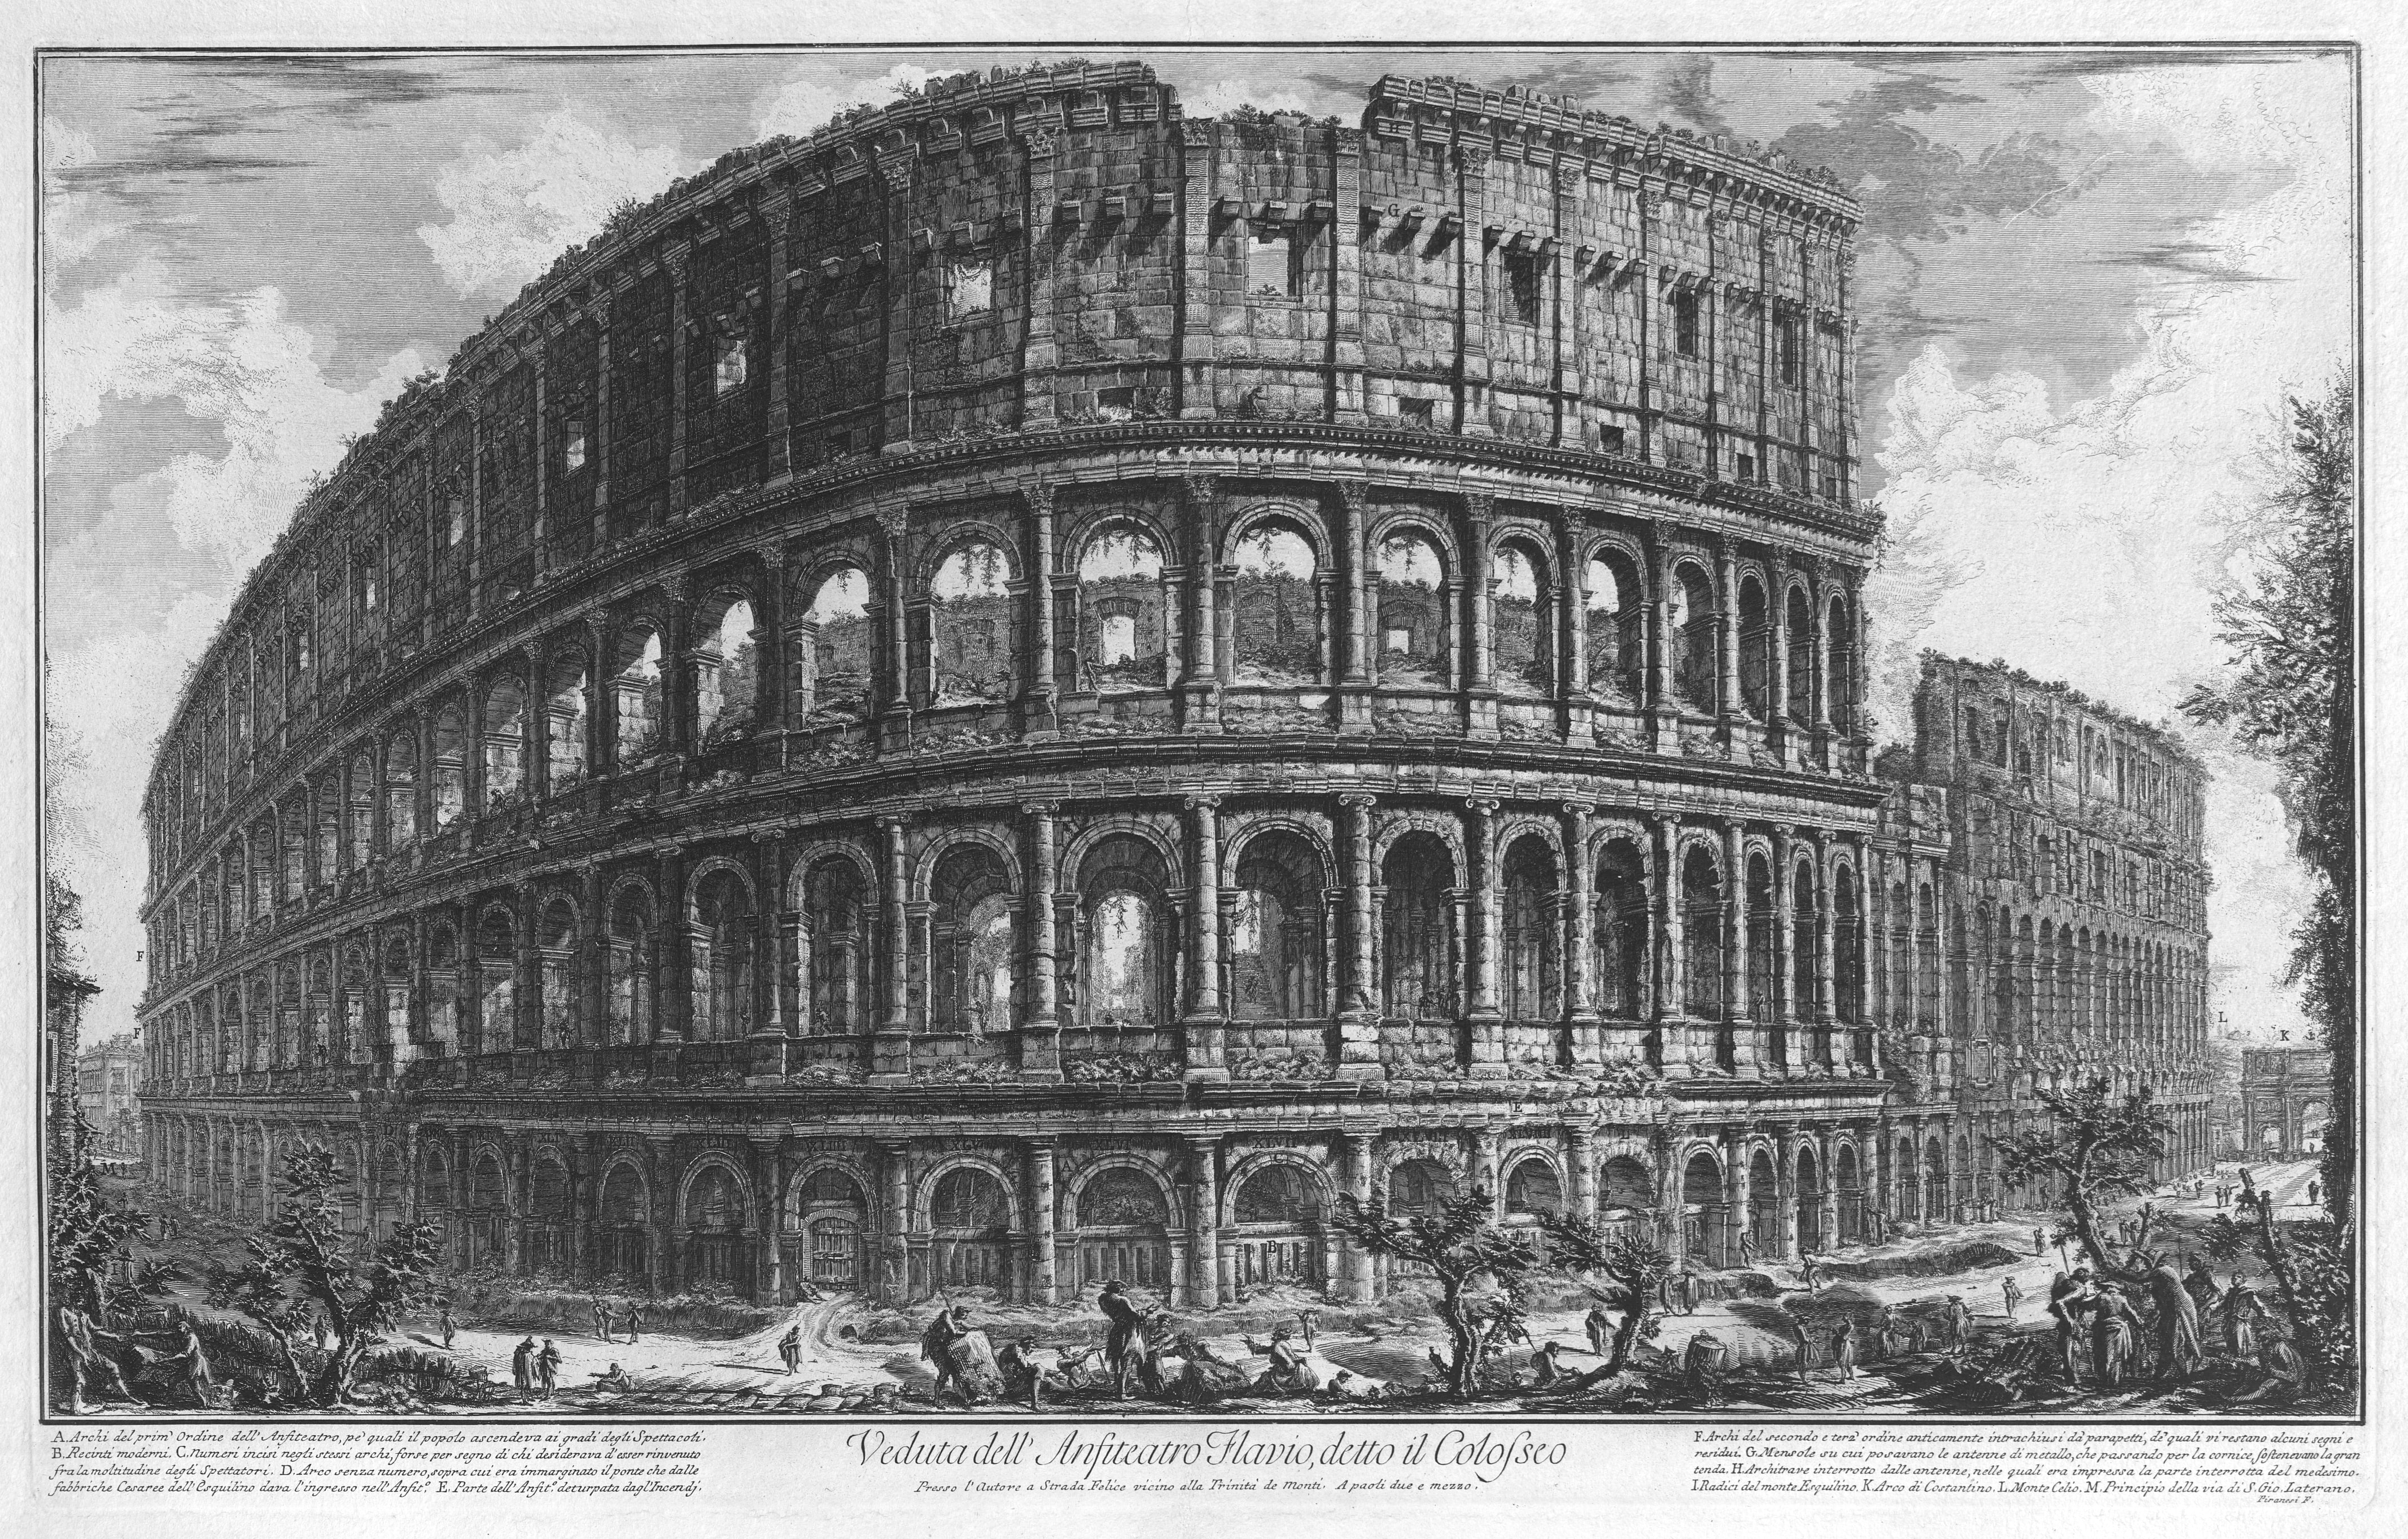 Artistic, Drawing, Colosseum, Rome